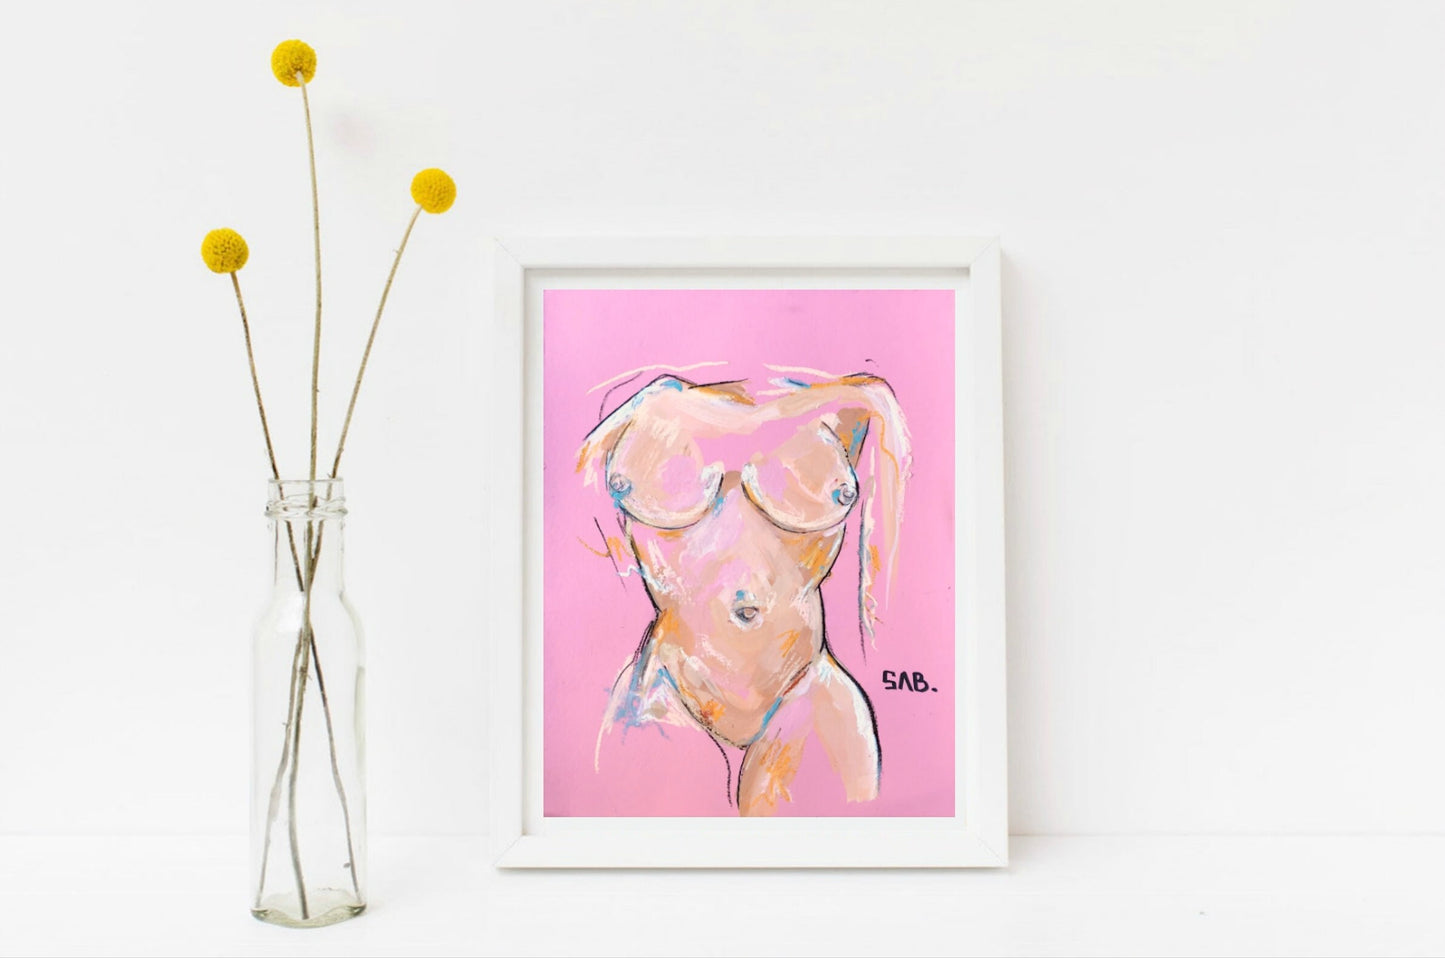 Figurative Female Body painting Print Abstract sexy bedroom home decor inspiring nude pastel original authentic fine art wall gift idea